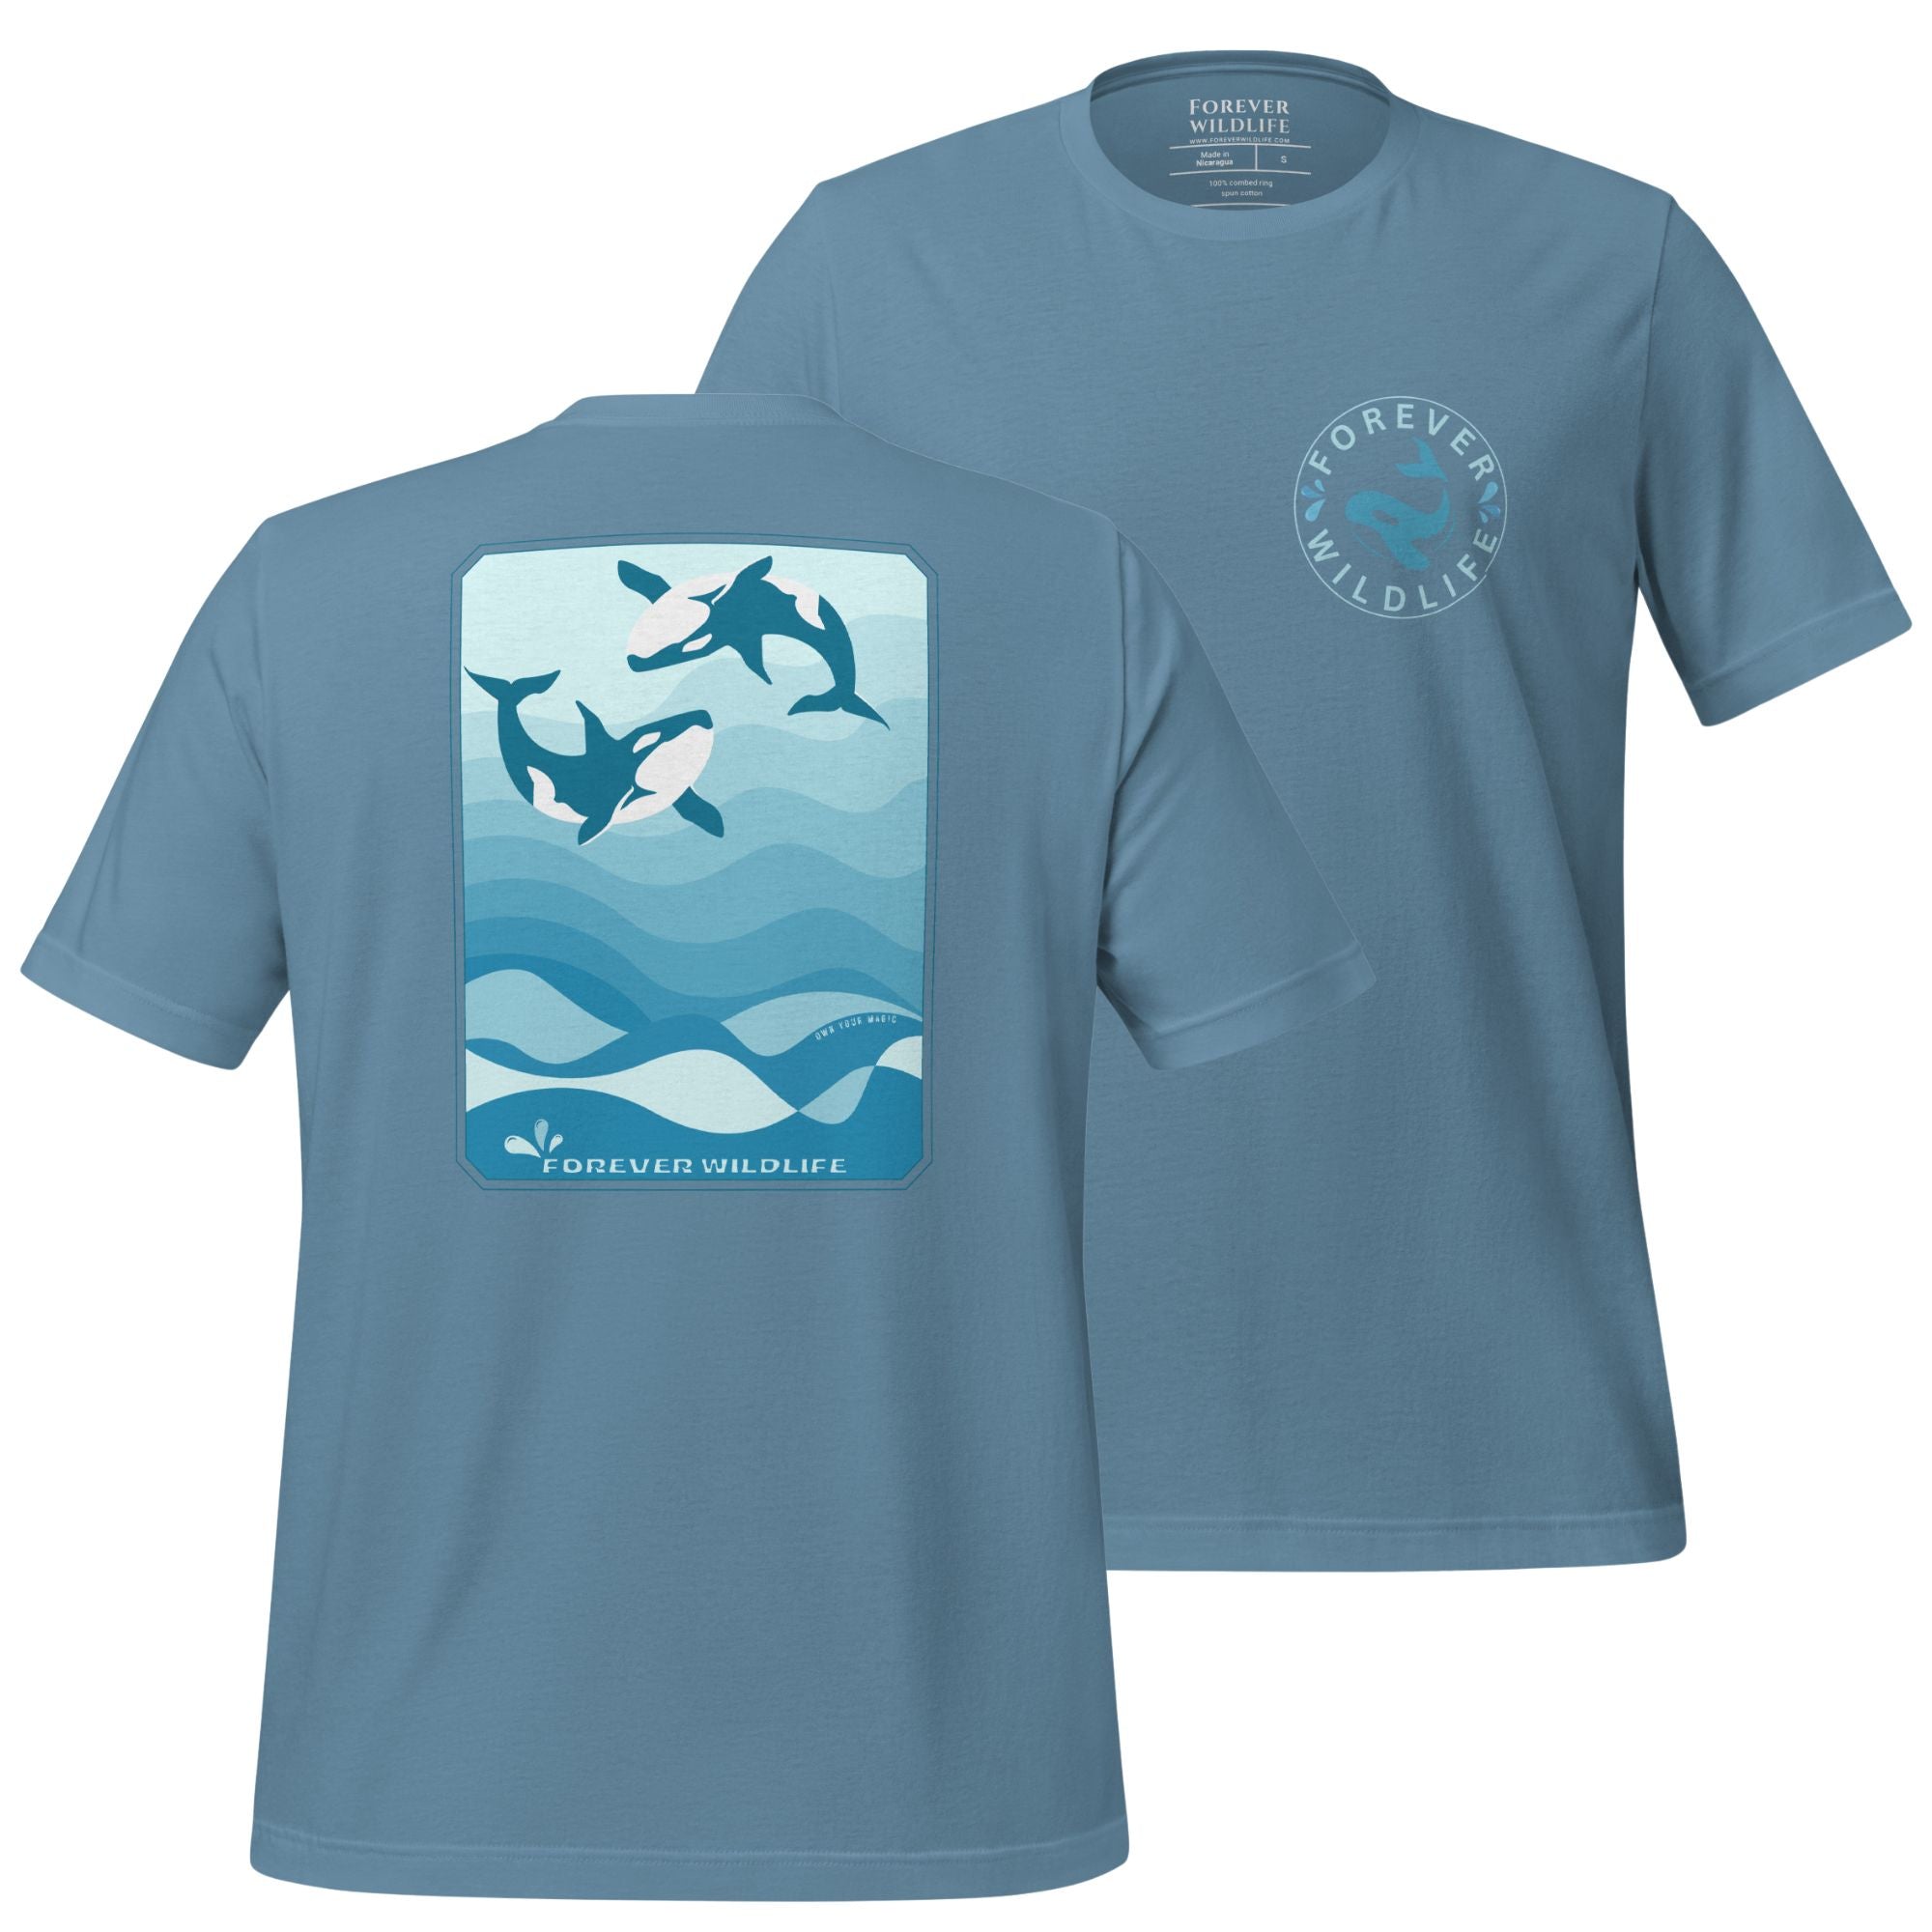 Orca Shirt, beautiful Steel Blue Orca T-Shirt with Killer Whales on the shirt by Forever Wildlife selling Wildlife T Shirts.